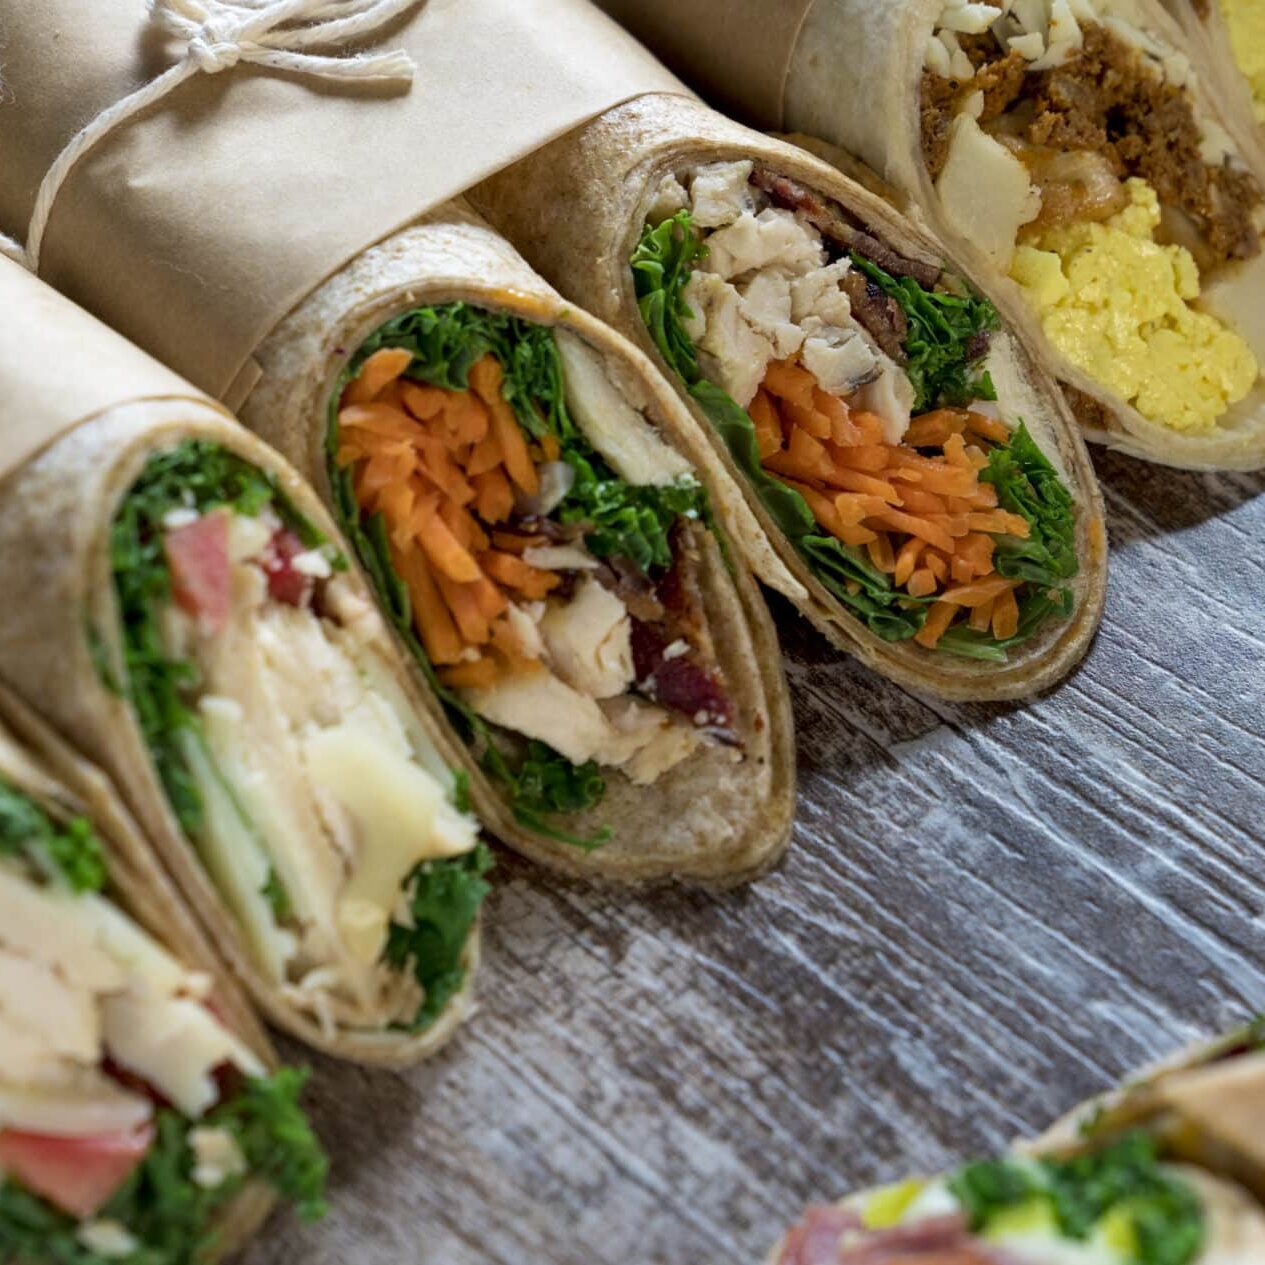 A variety of food wraps in brown paper on a wood backdrop